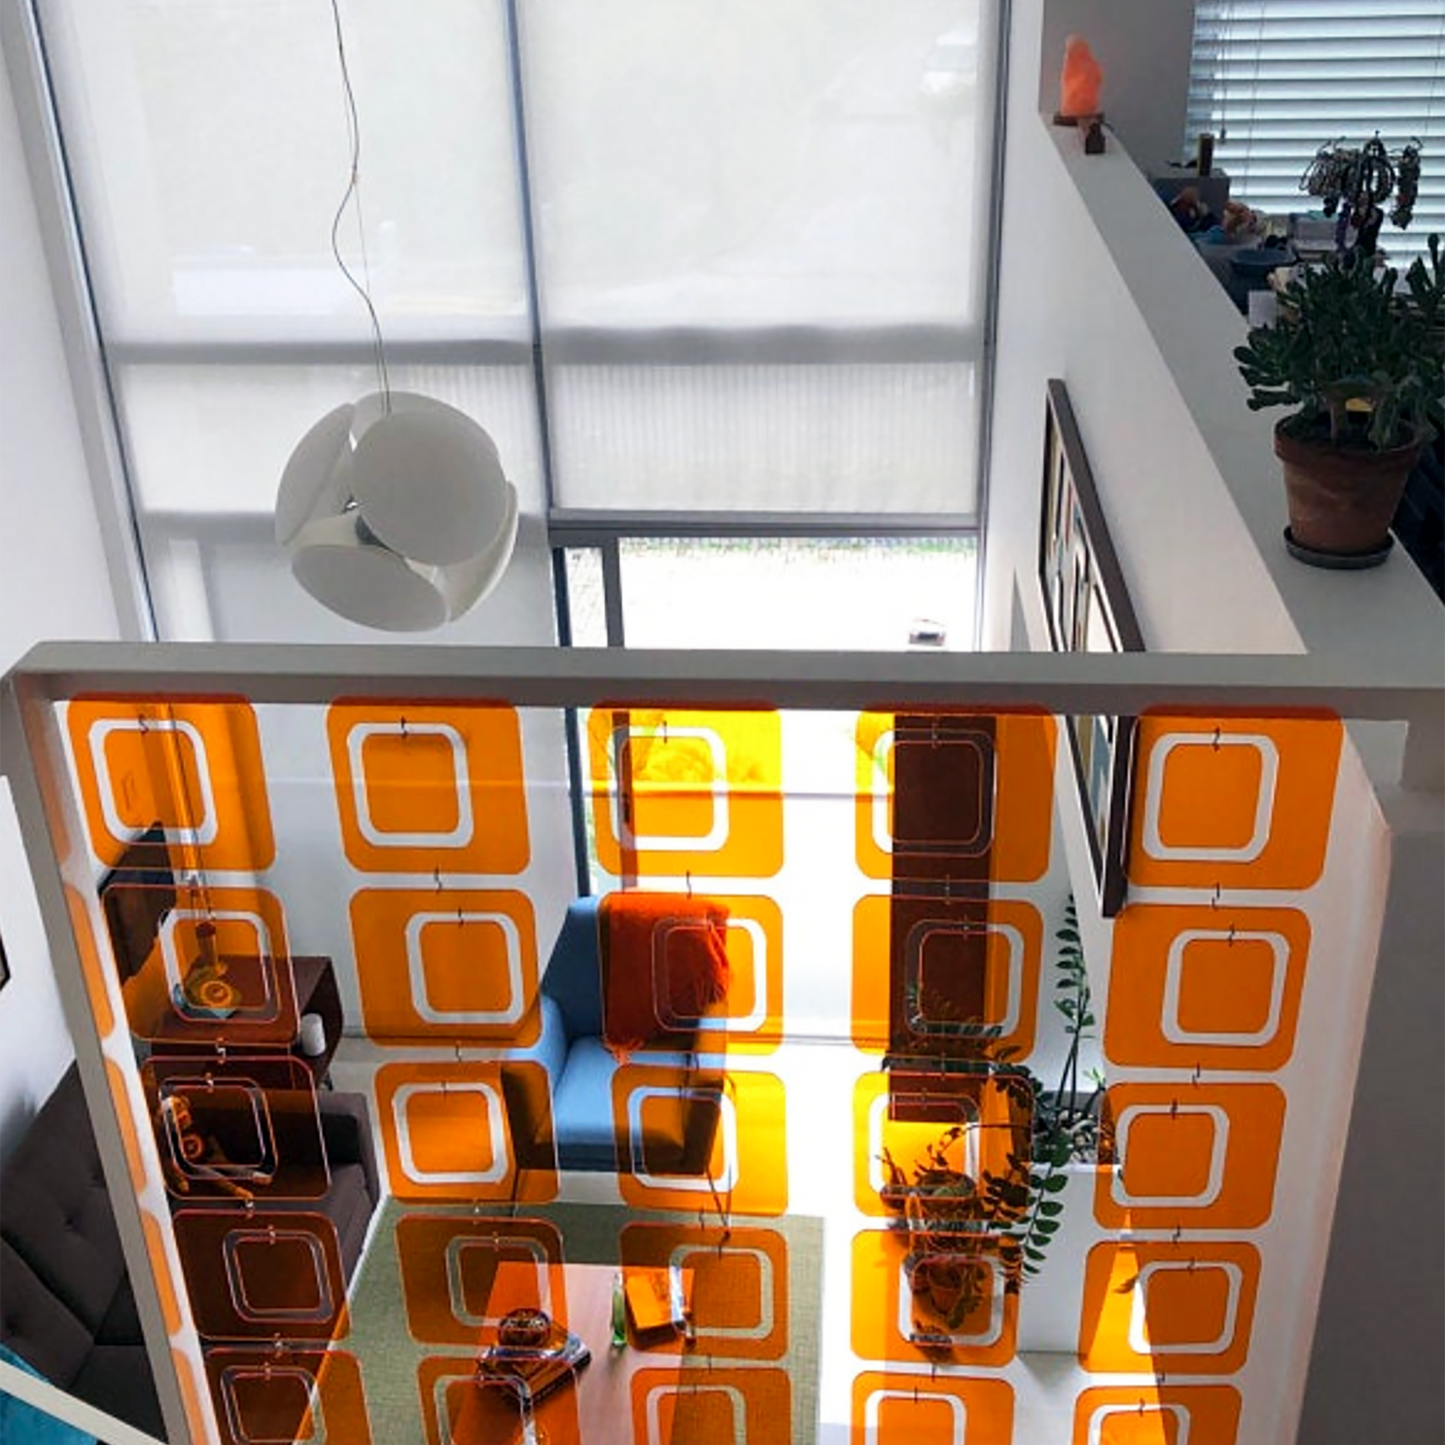 Clear Orange Coolsville Room Divider Kit installed in Mid Century Modern Living Room by AtomicMobiles.com